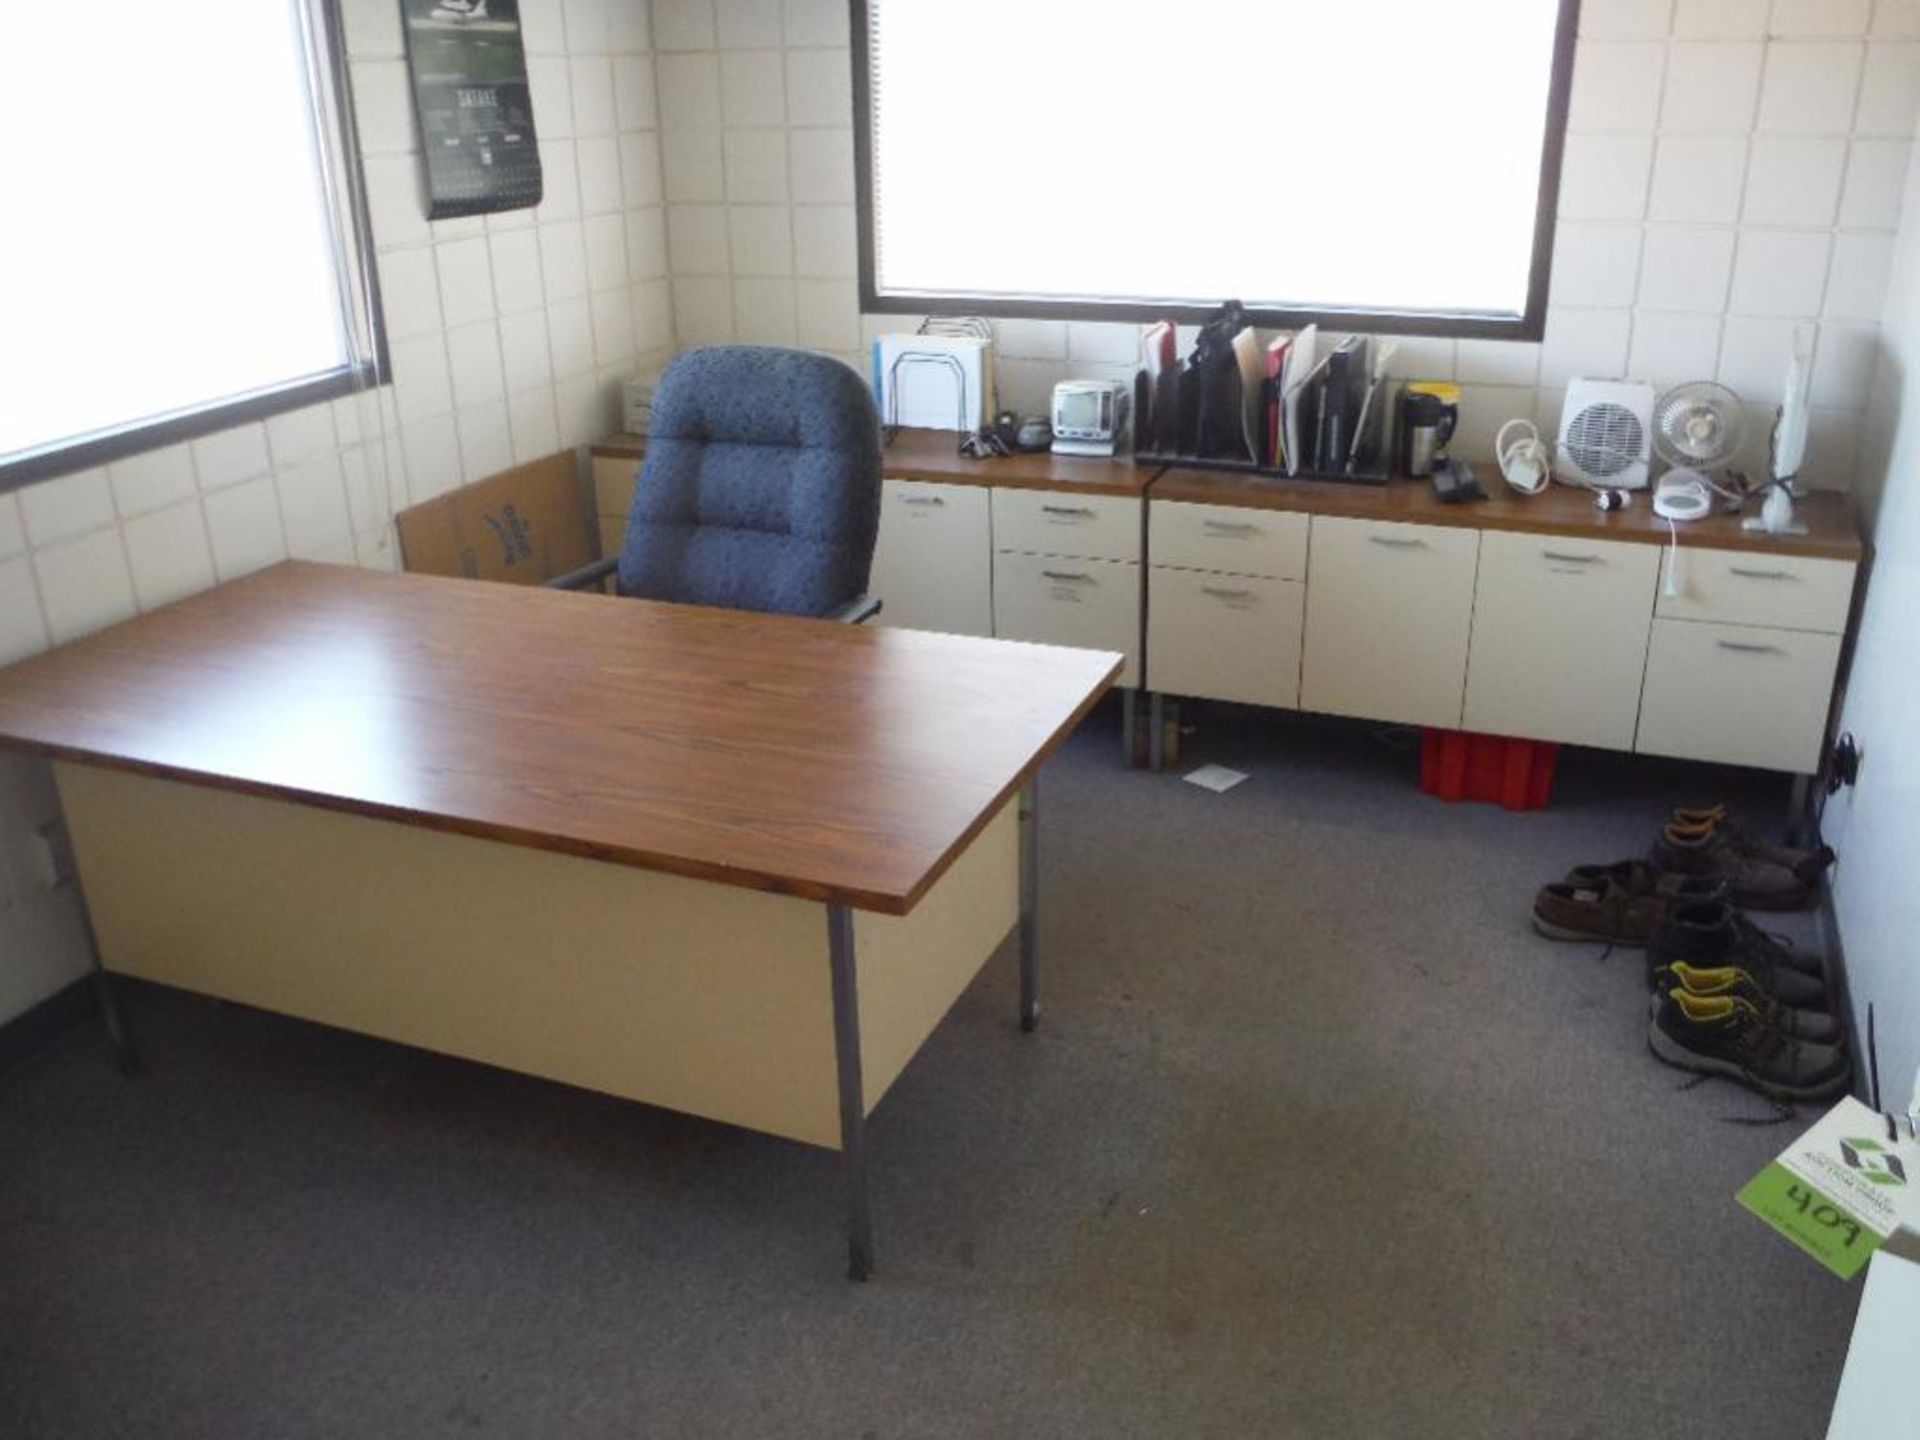 Contents of office, desk, 2 credenzas, 3 chairs, supplies ** Rigging Fee: $250 **